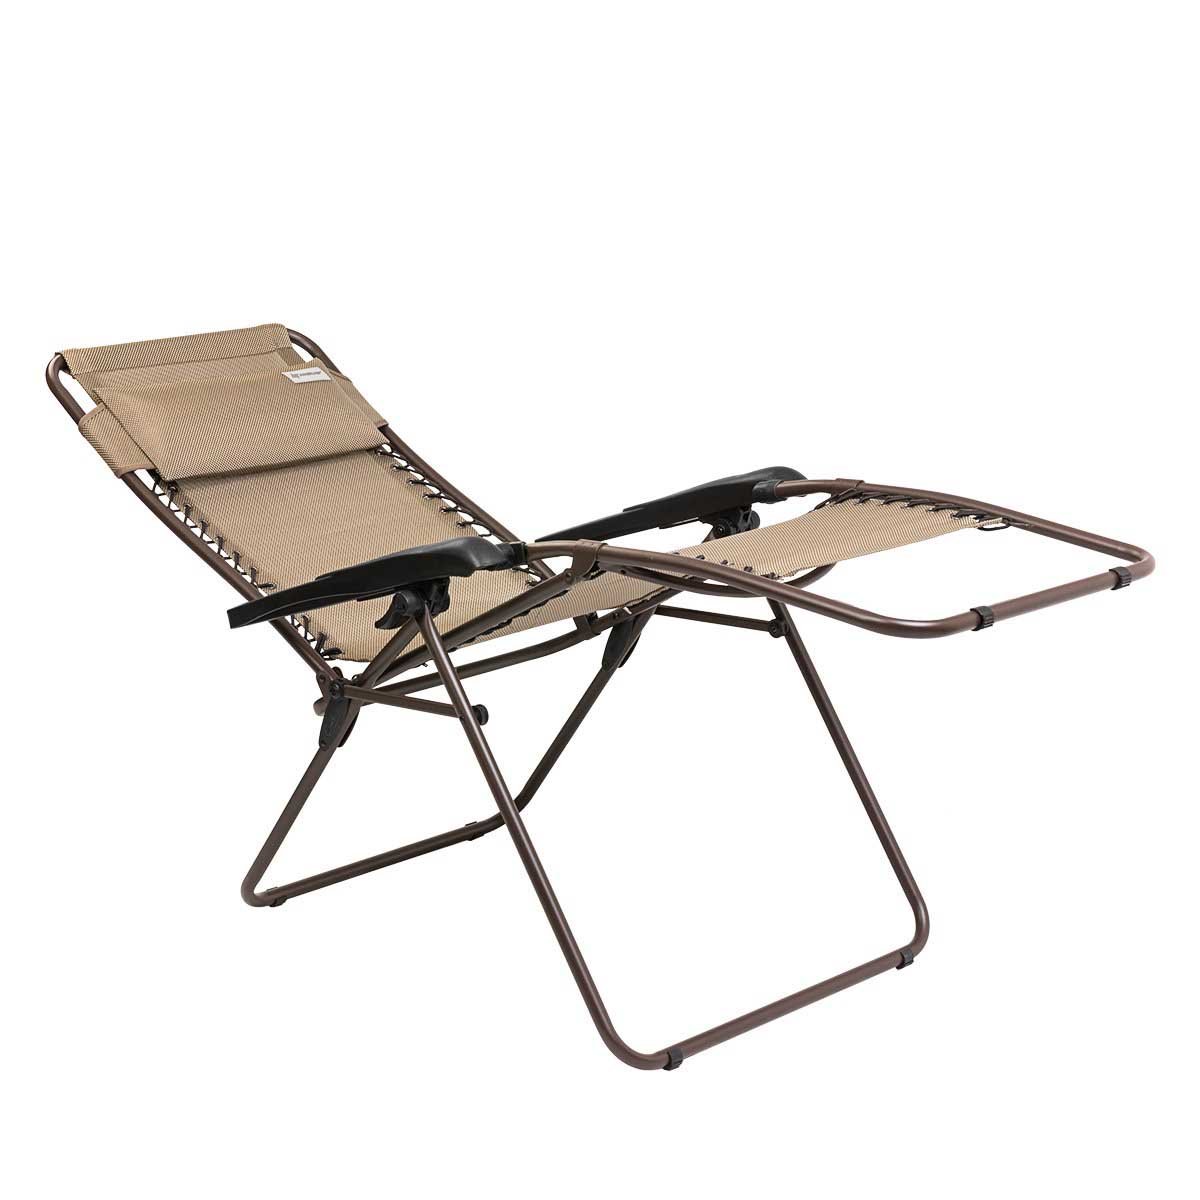 Zero Gravity Folding Patio Chair is a perfect example of a comfortable recliner